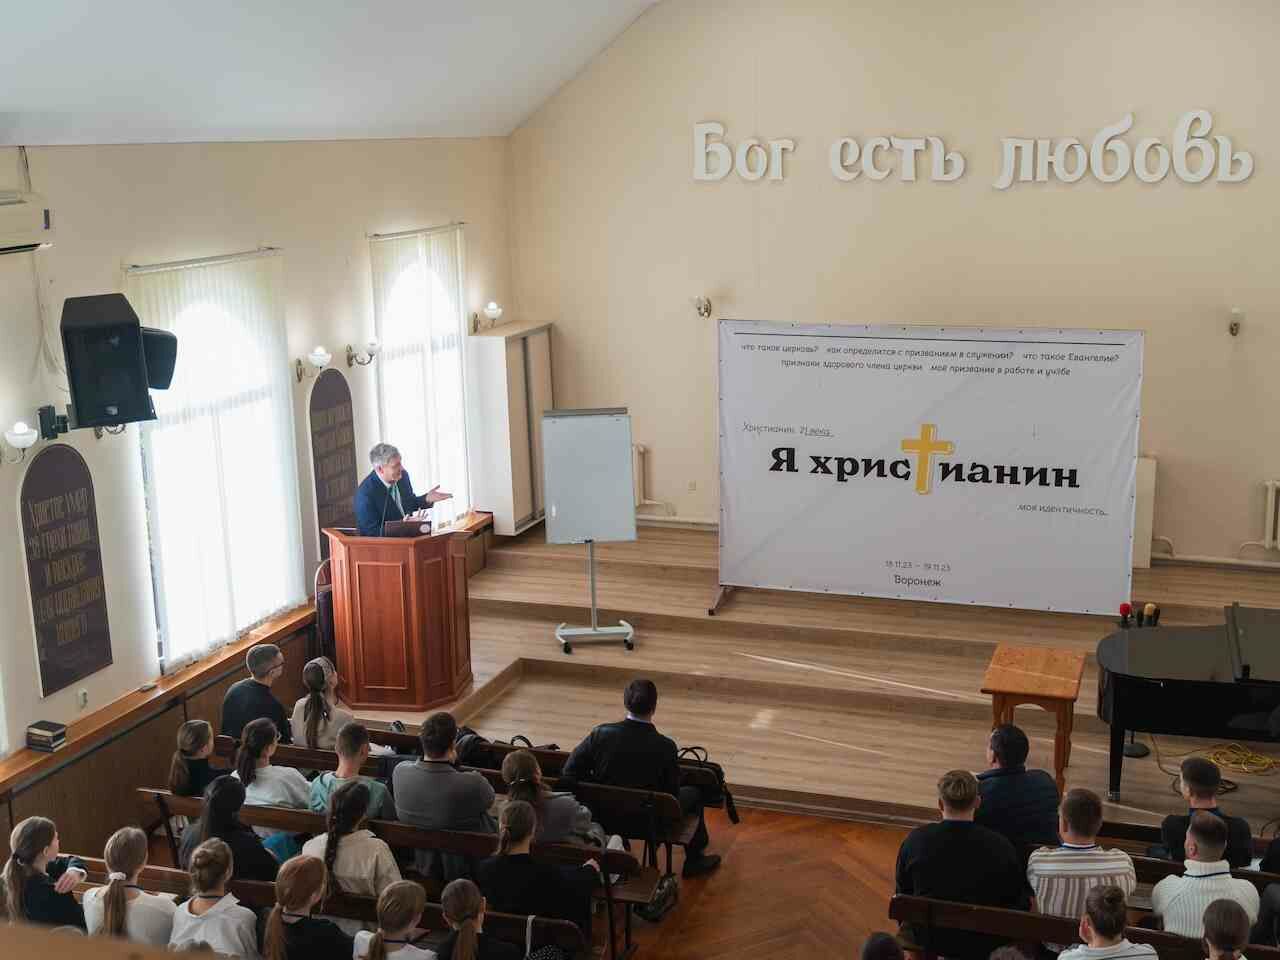 The "anti-missionary" law in Russia persecutes Christian churches.